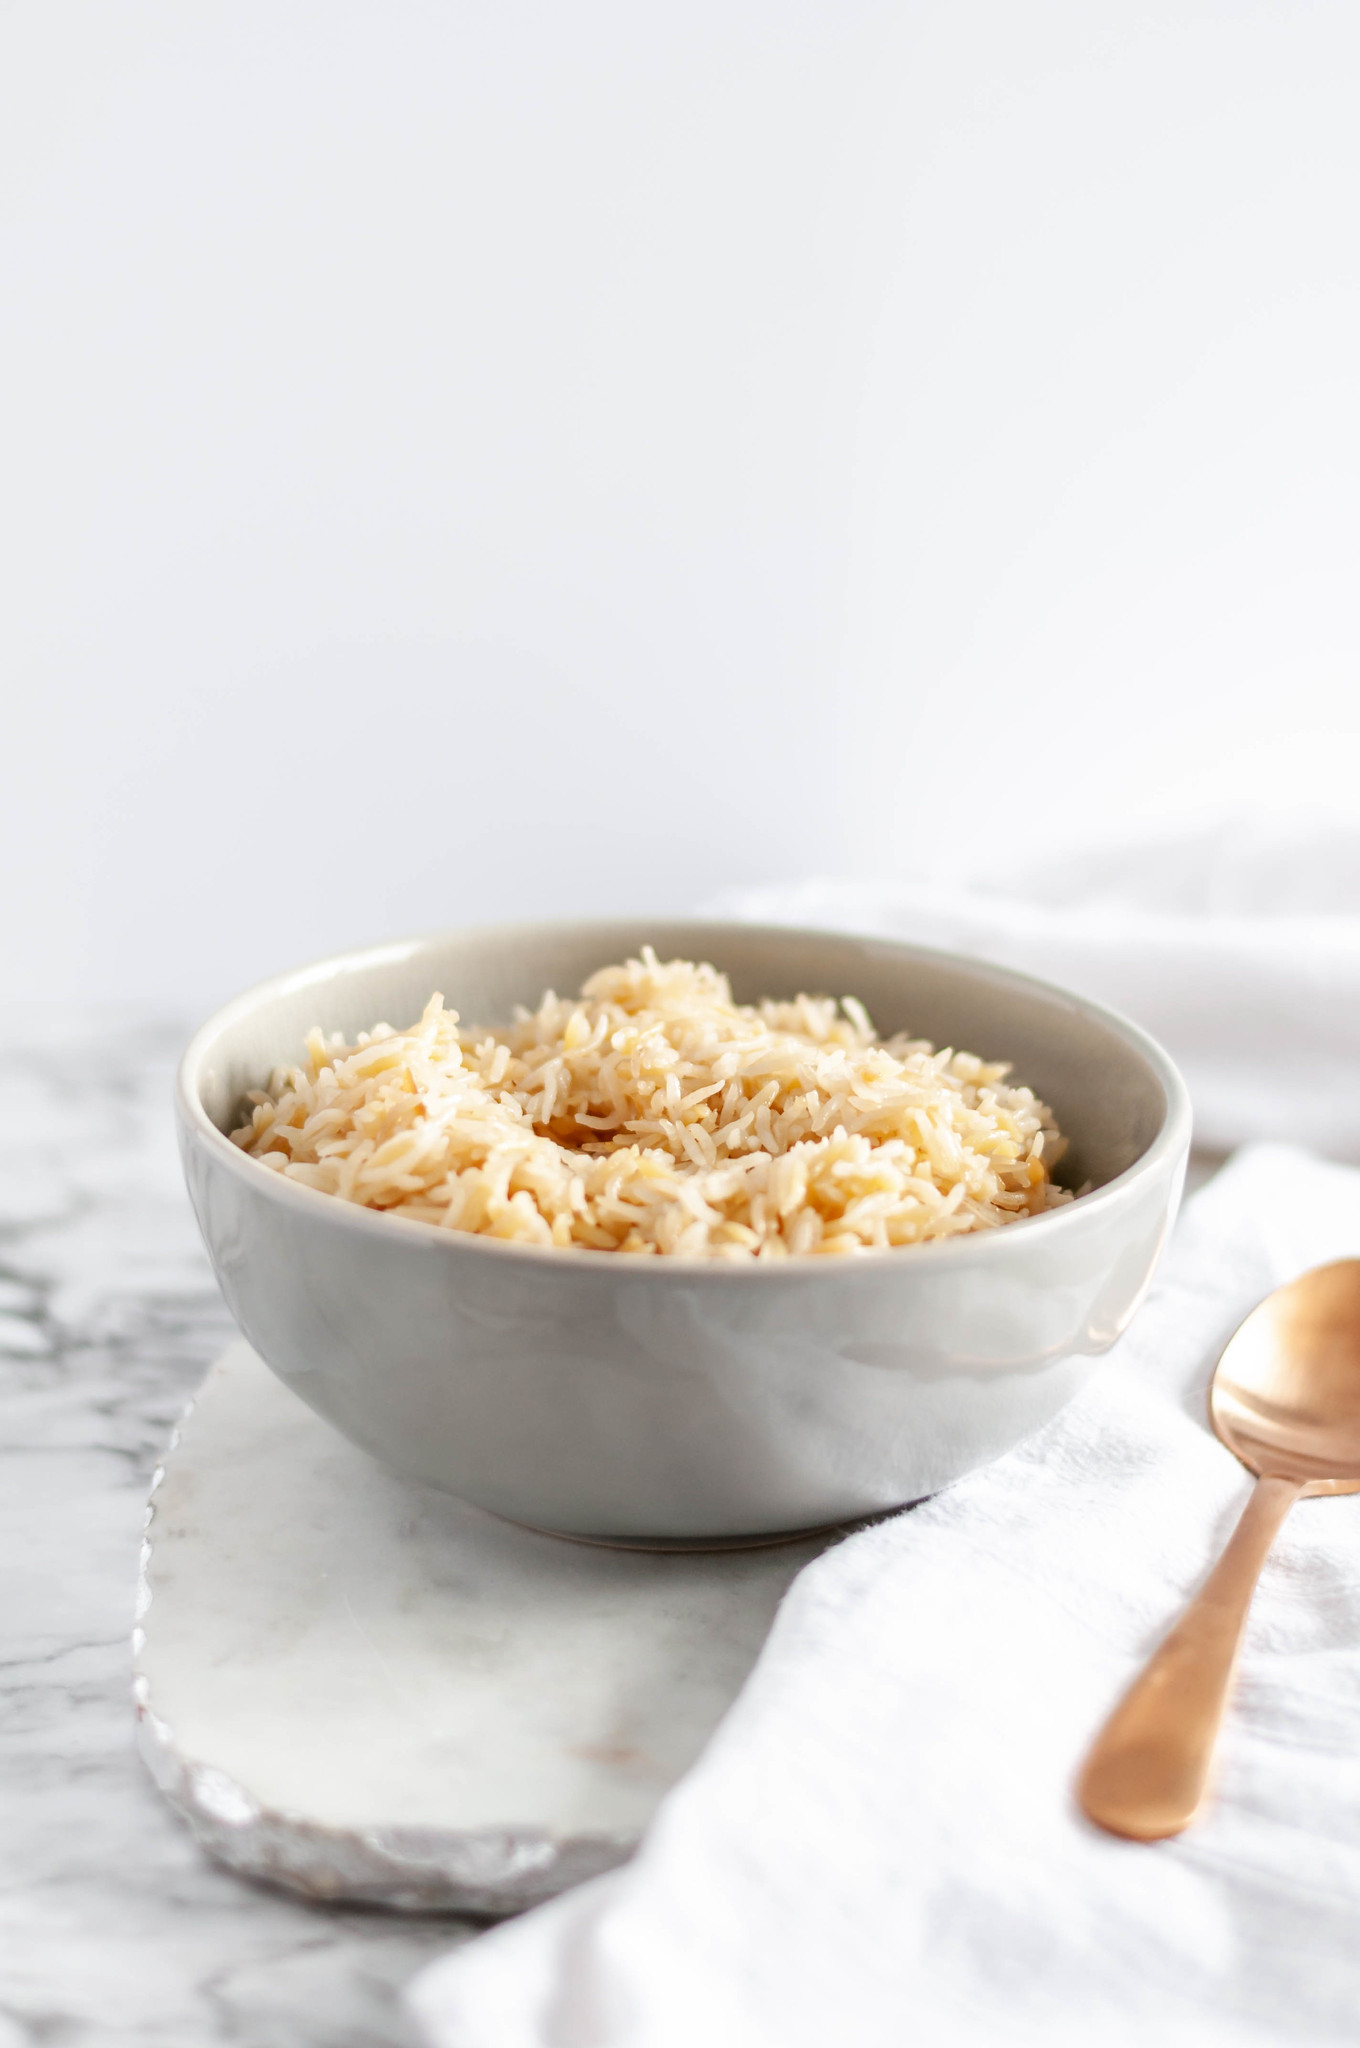 Make this Instant Pot Rice Pilaf for a super simple and flavorful side dish any night of the week. Staple pantry ingredients make up the dish and it takes less than 20 minutes to make. Perfect for a busy weeknight meal.